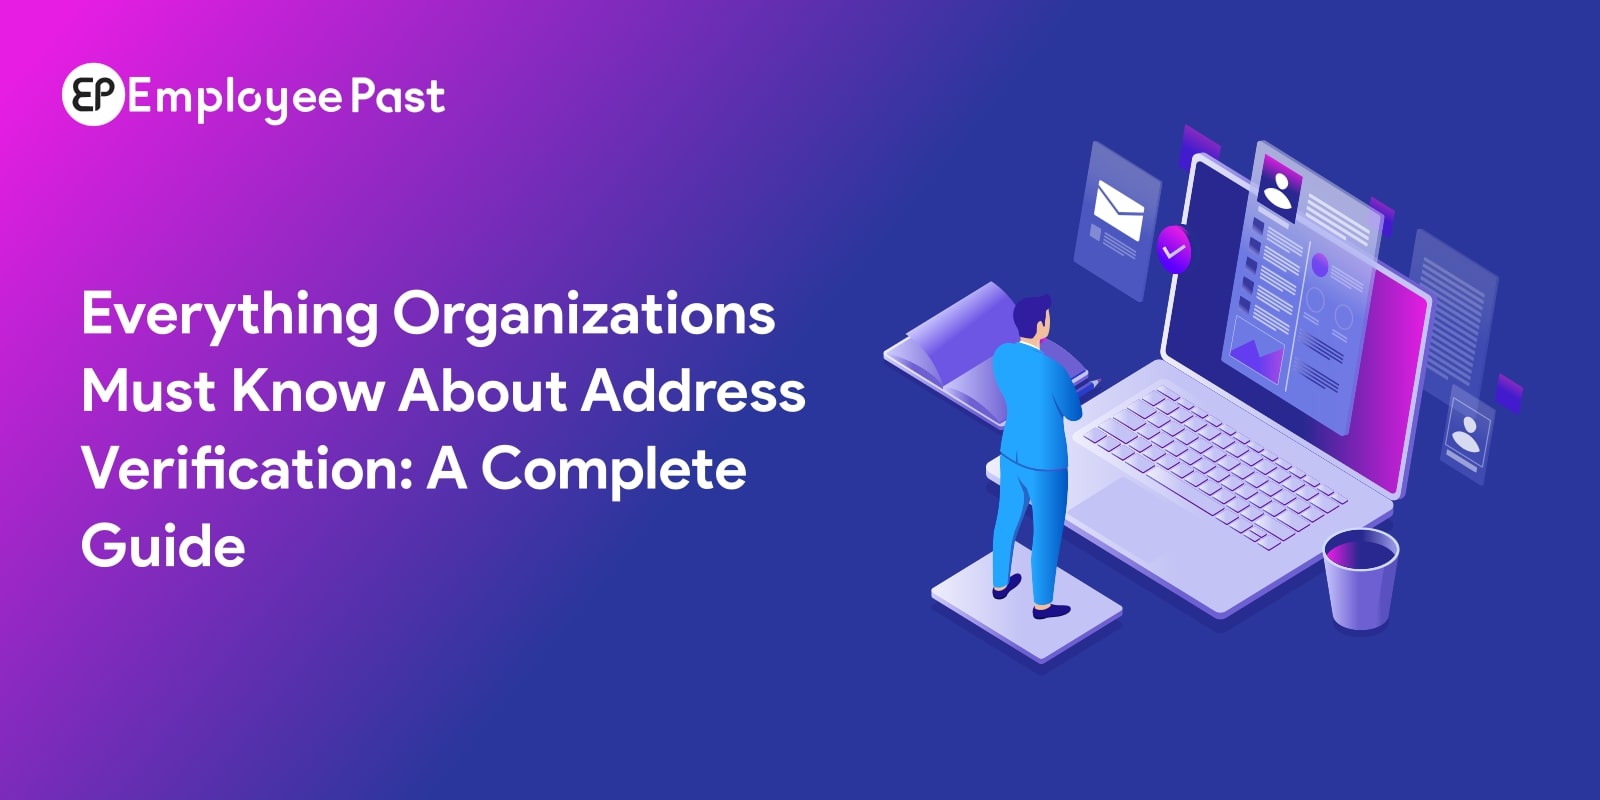 Everything Organizations Must Know About Address Verification: A Complete Guide